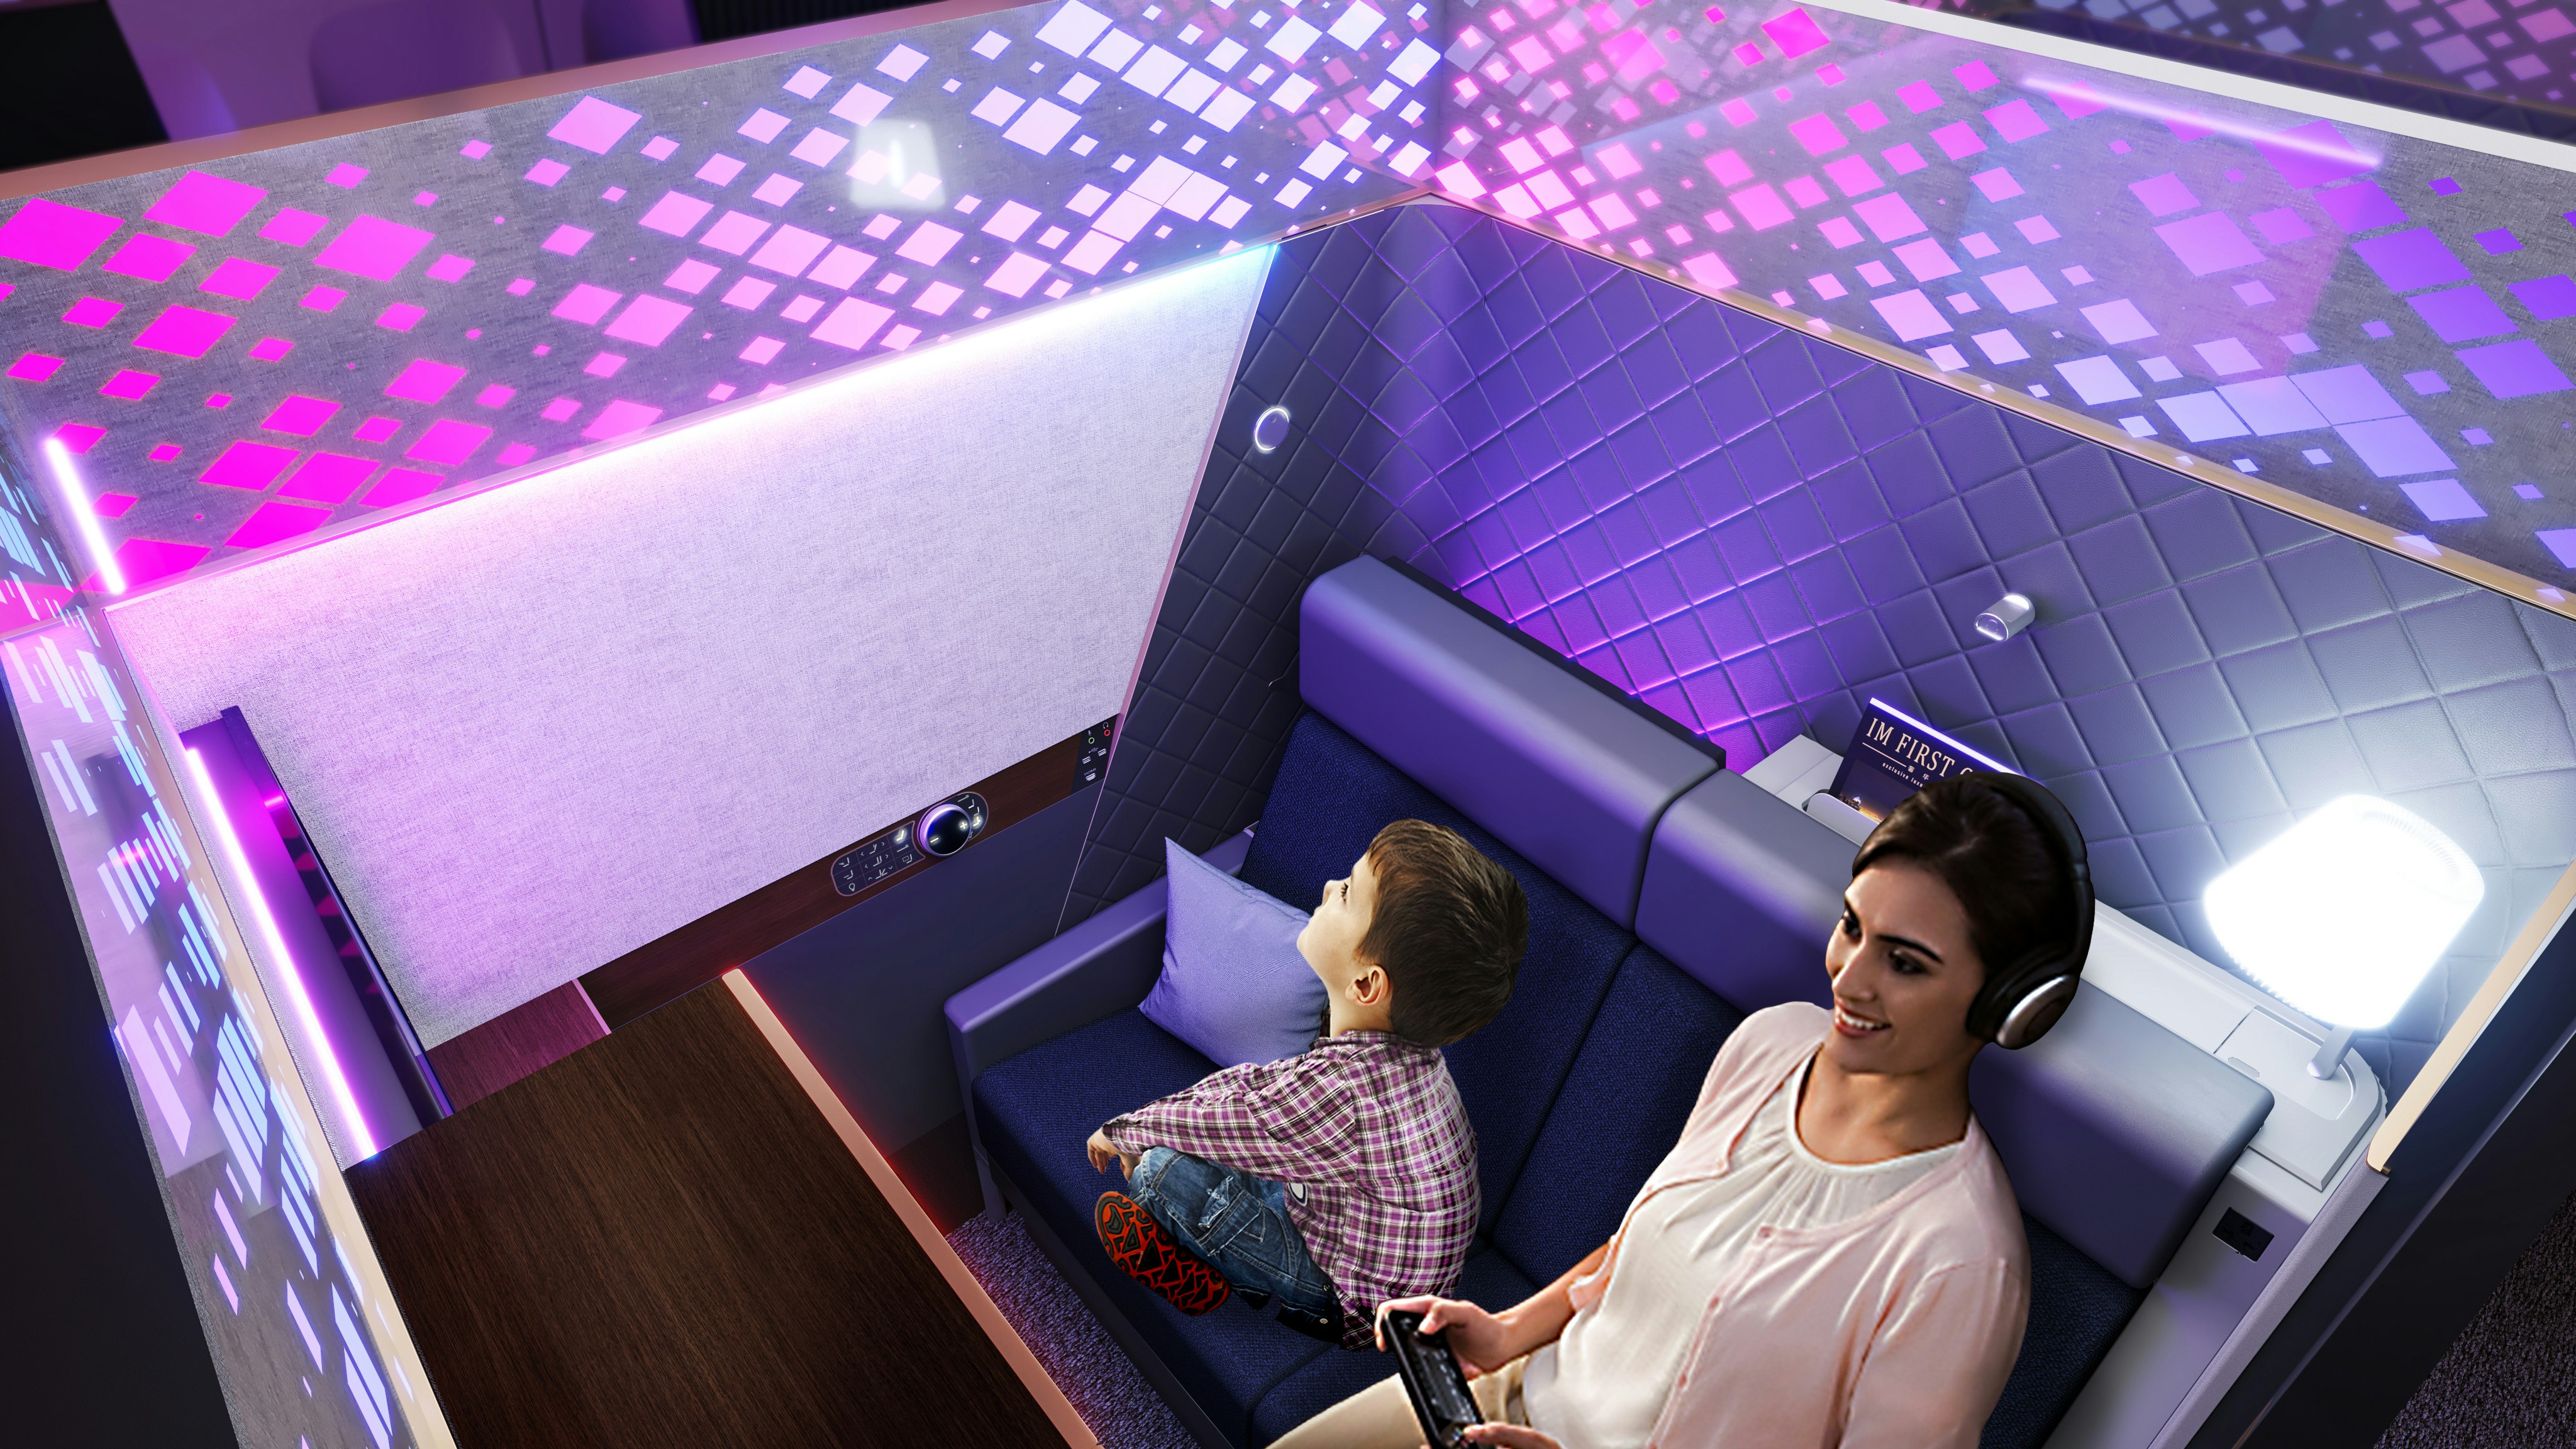 A young boy and a woman in an airplane suite with purple and pink lighting